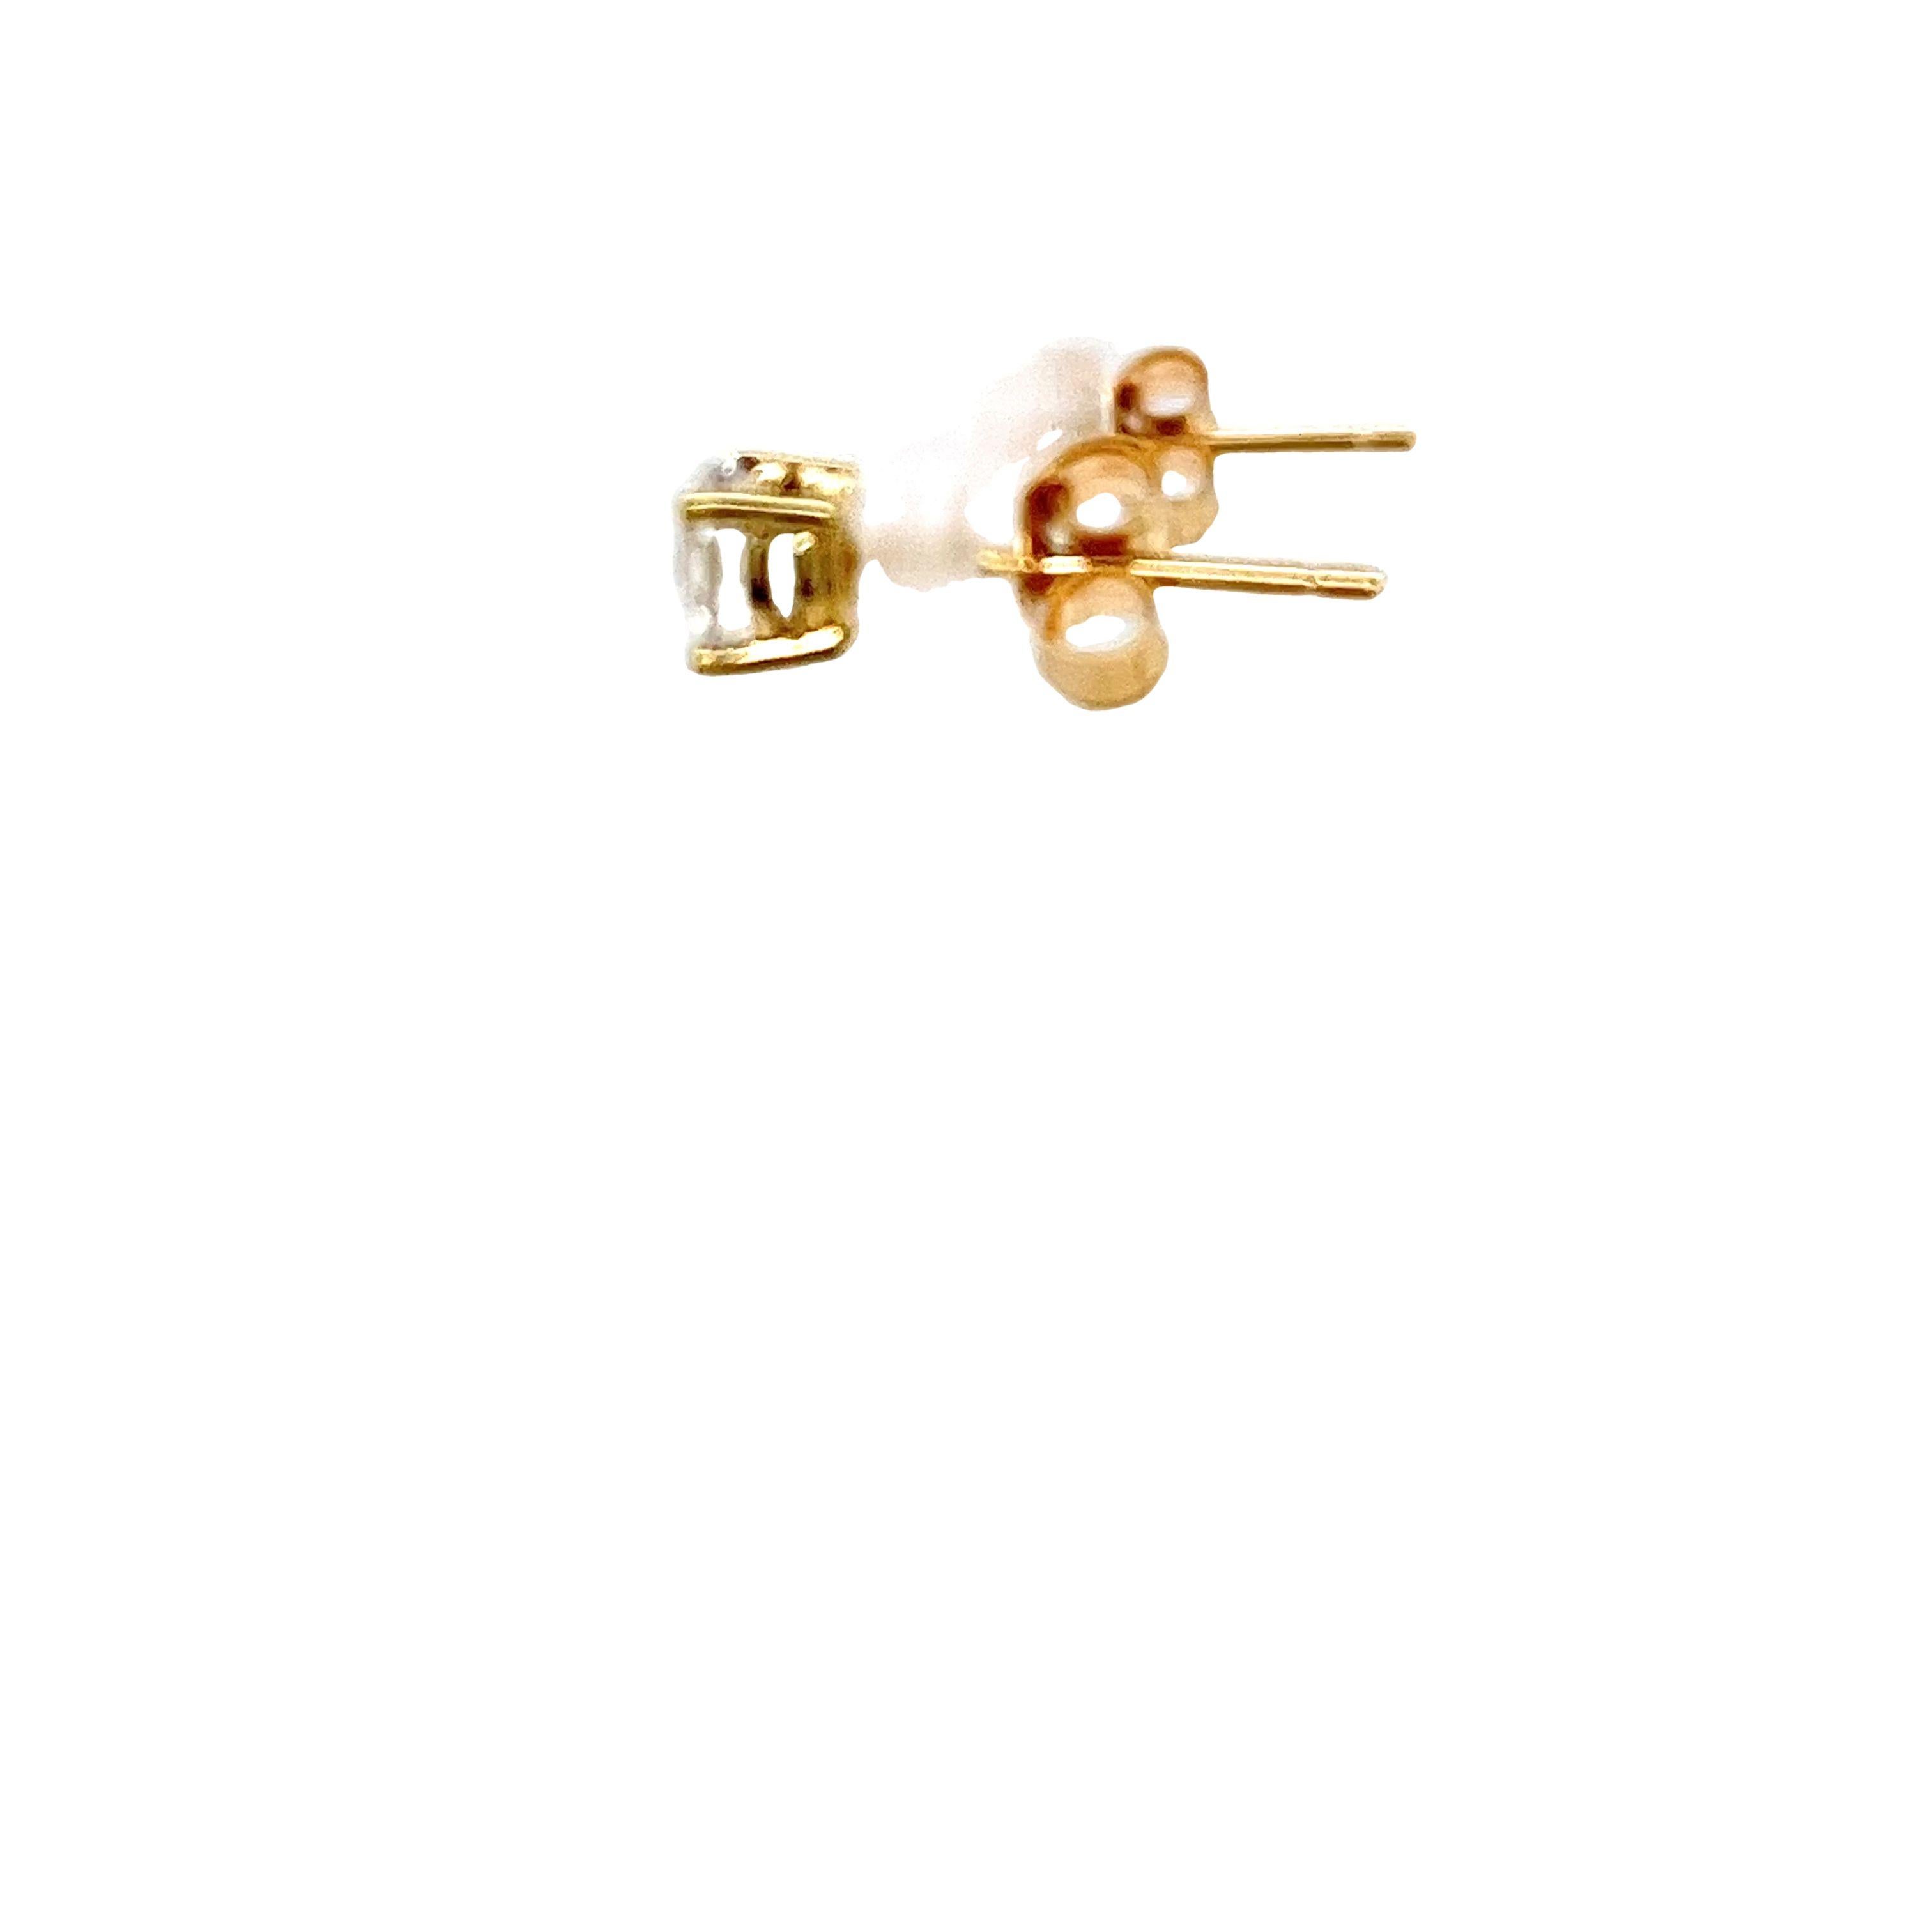 This pair of diamond stud earrings 
features a total of 1.06ct of round brilliant cut diamonds laboratory created, set in 9ct yellow gold. 
It's perfect for everyday and can be worn with any outfit.
Total Diamond Weight: 1.06ct
Diamond Colour: